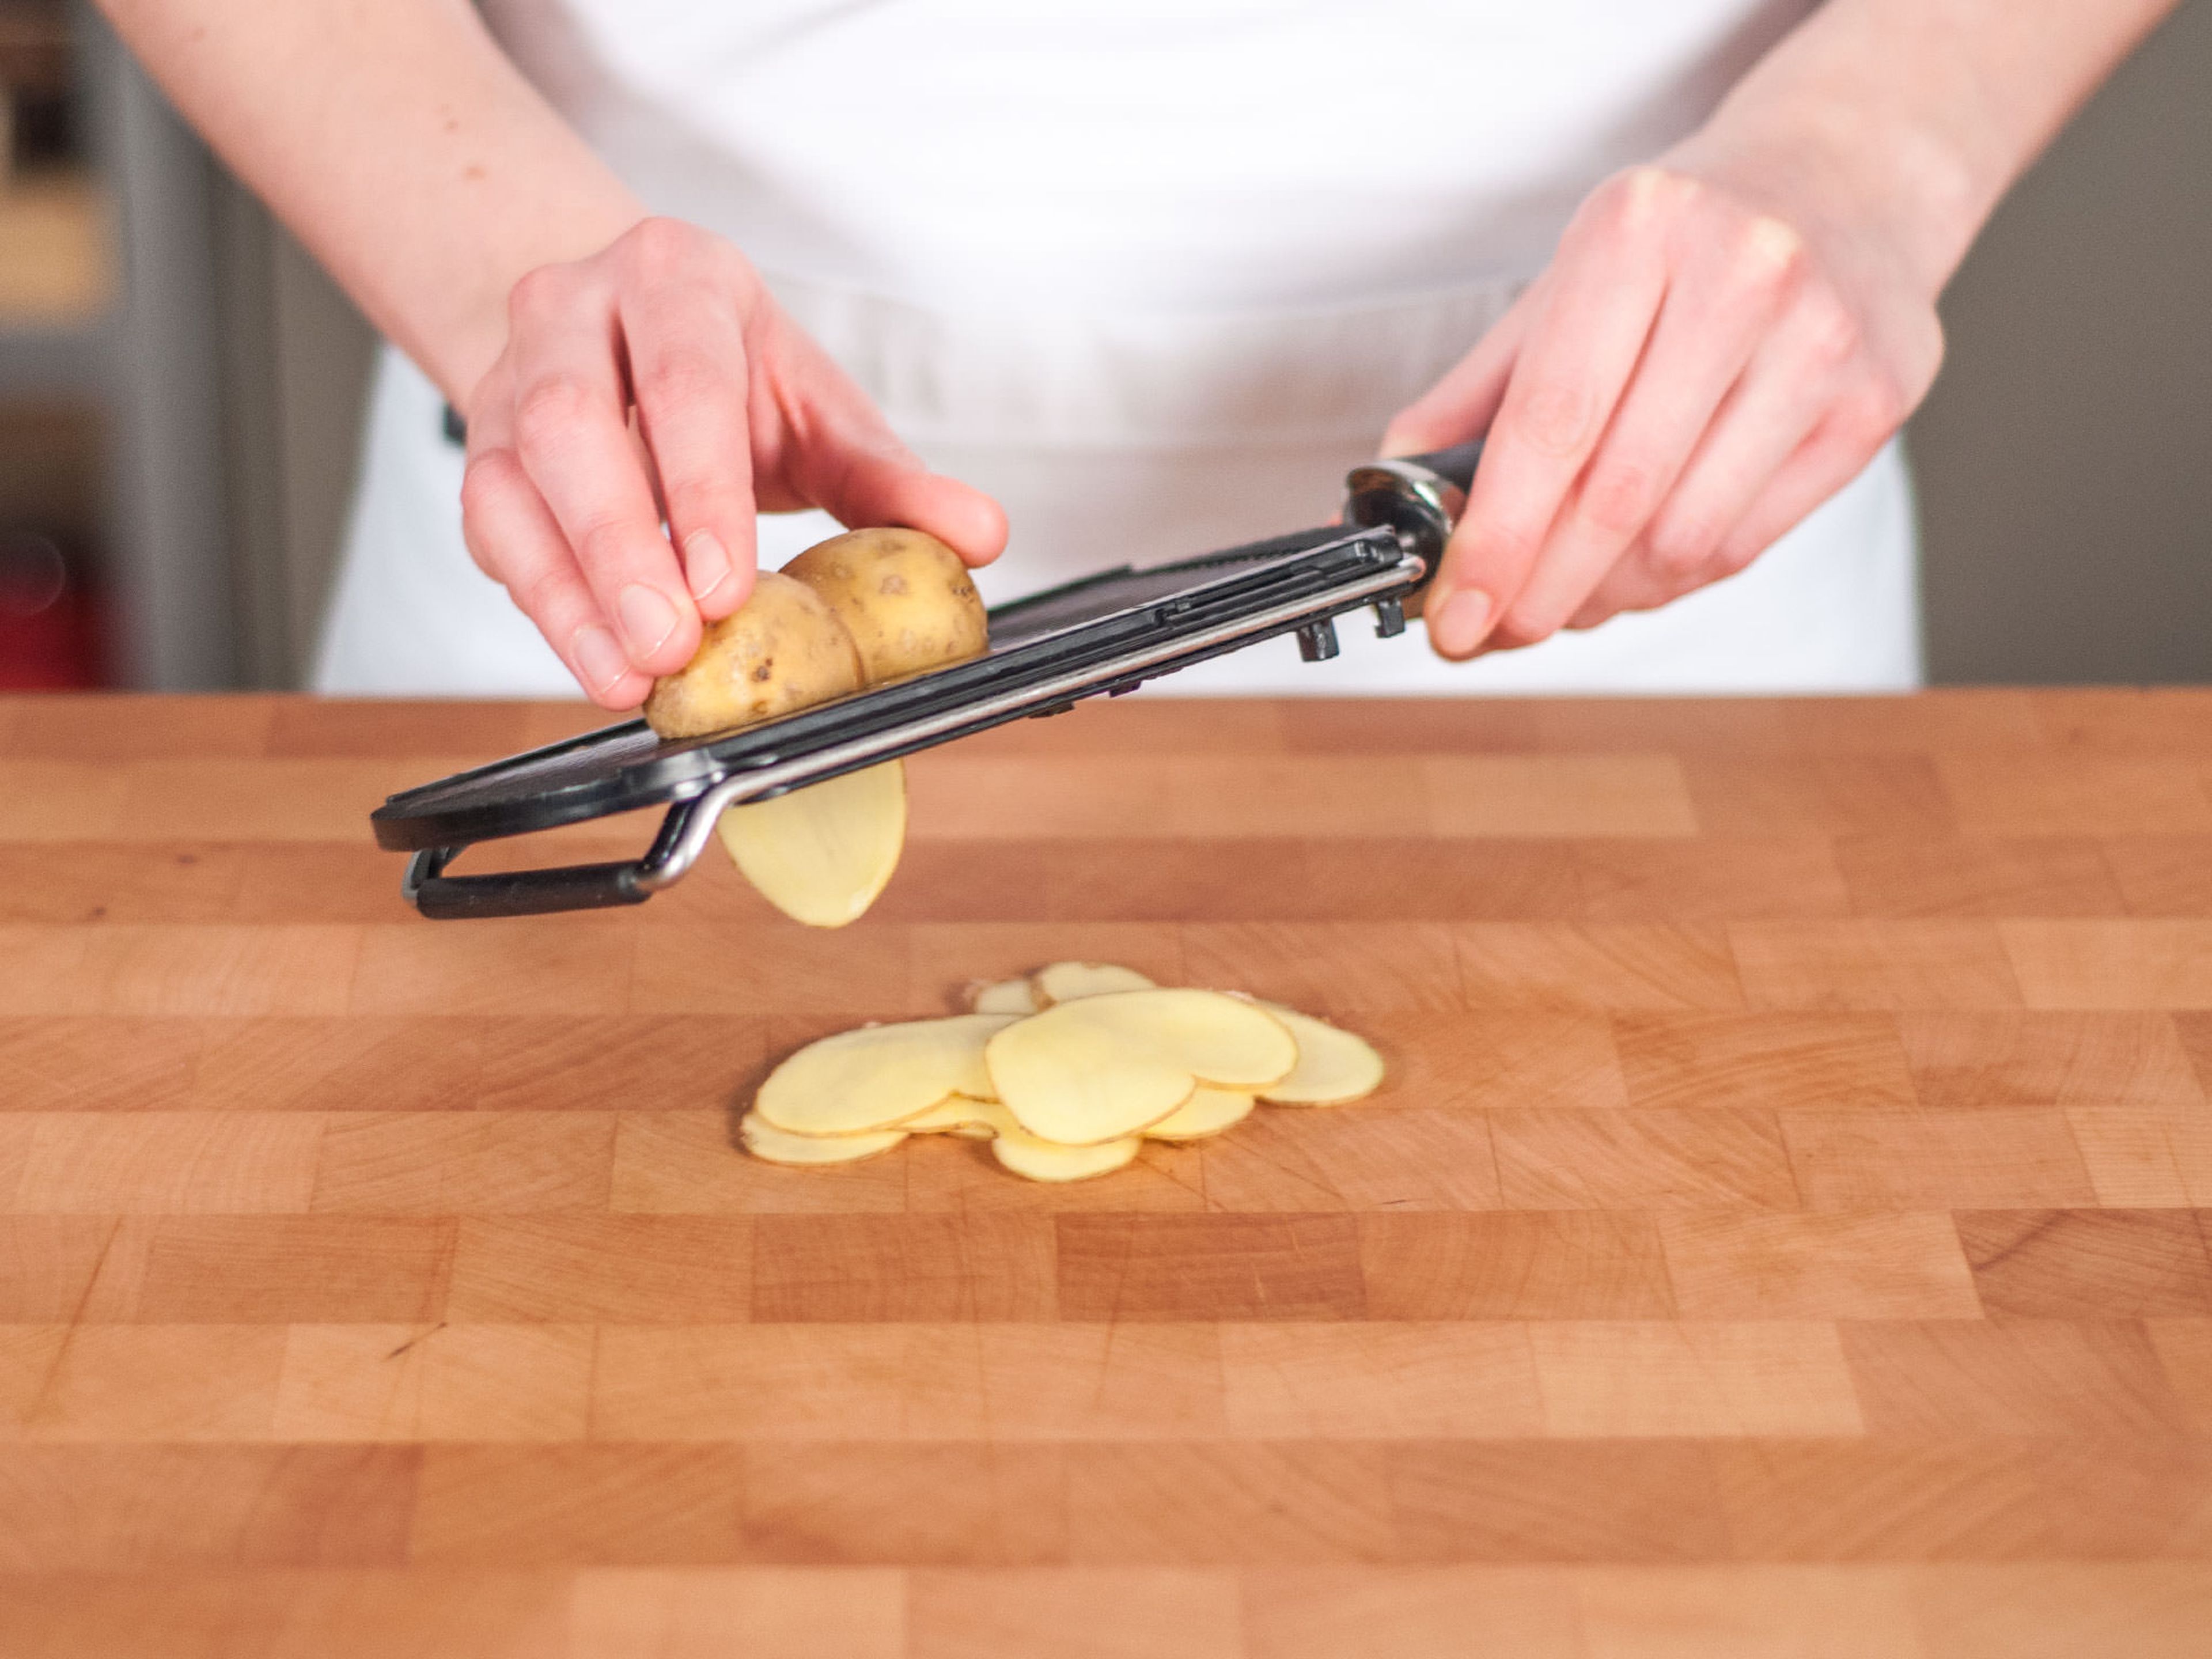 Use slicer or a sharp knife to cut potatoes into thin slices.